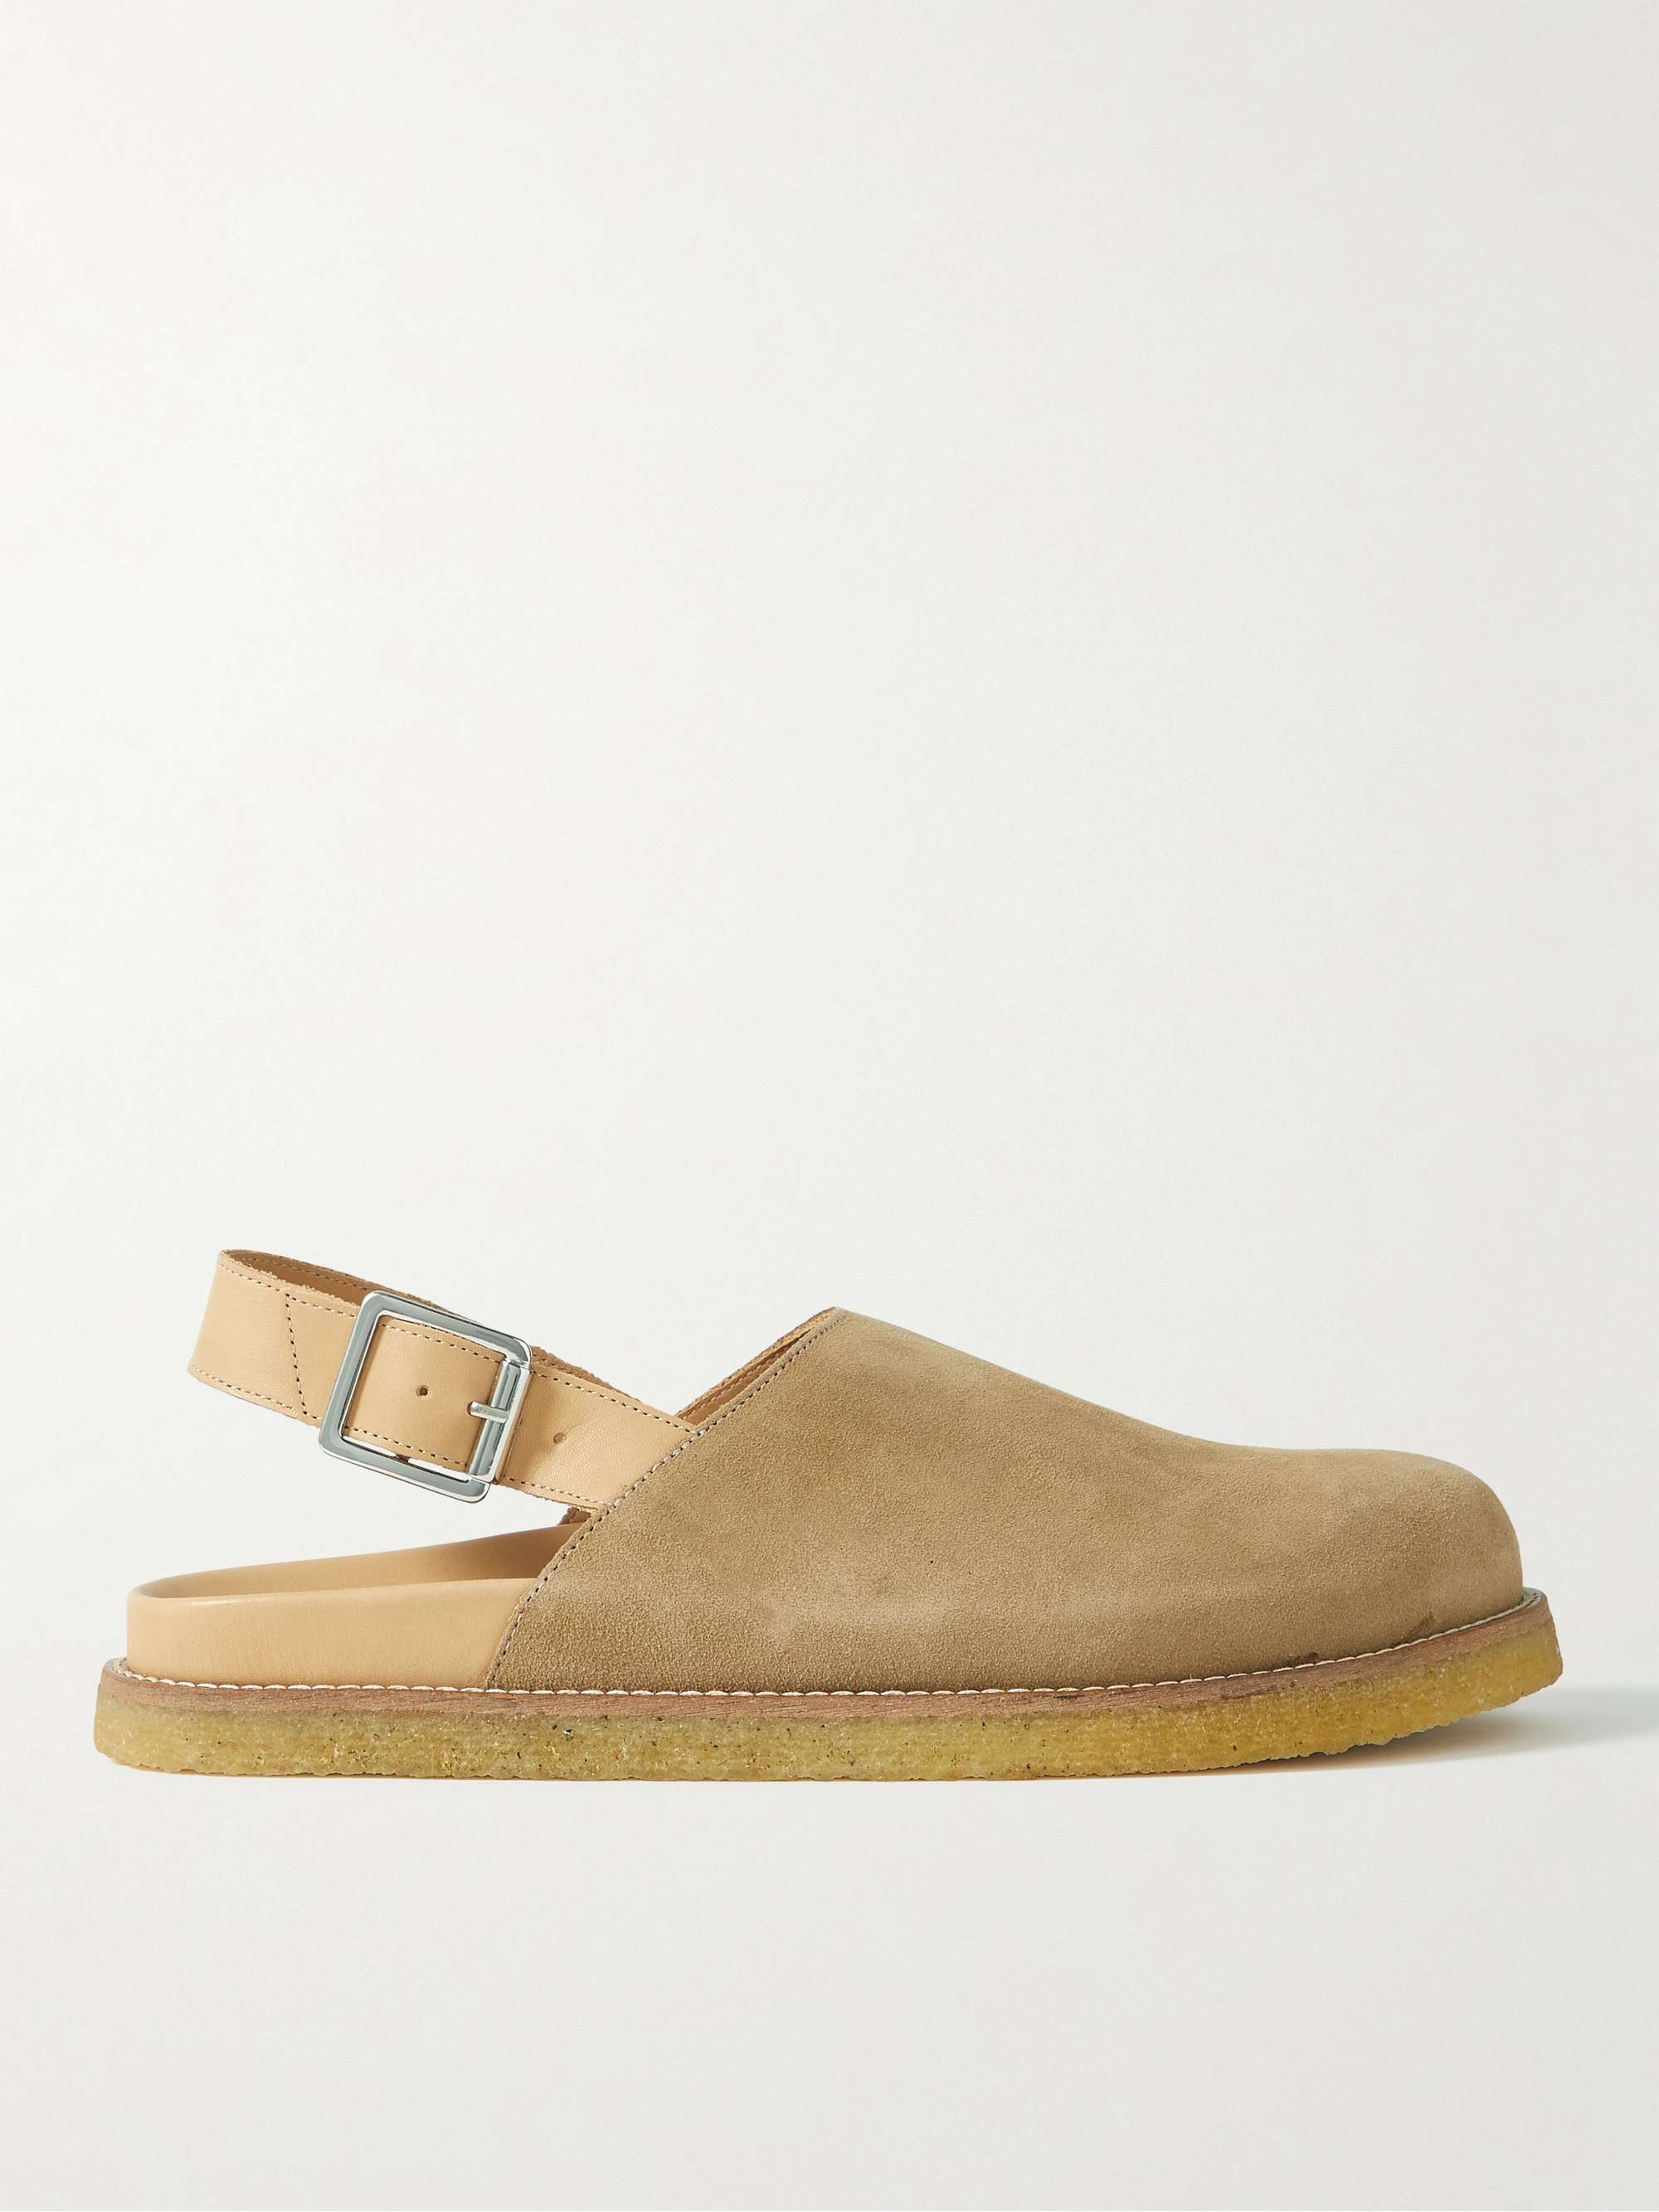 VINNY'S Leather-Trimmed Suede Mules